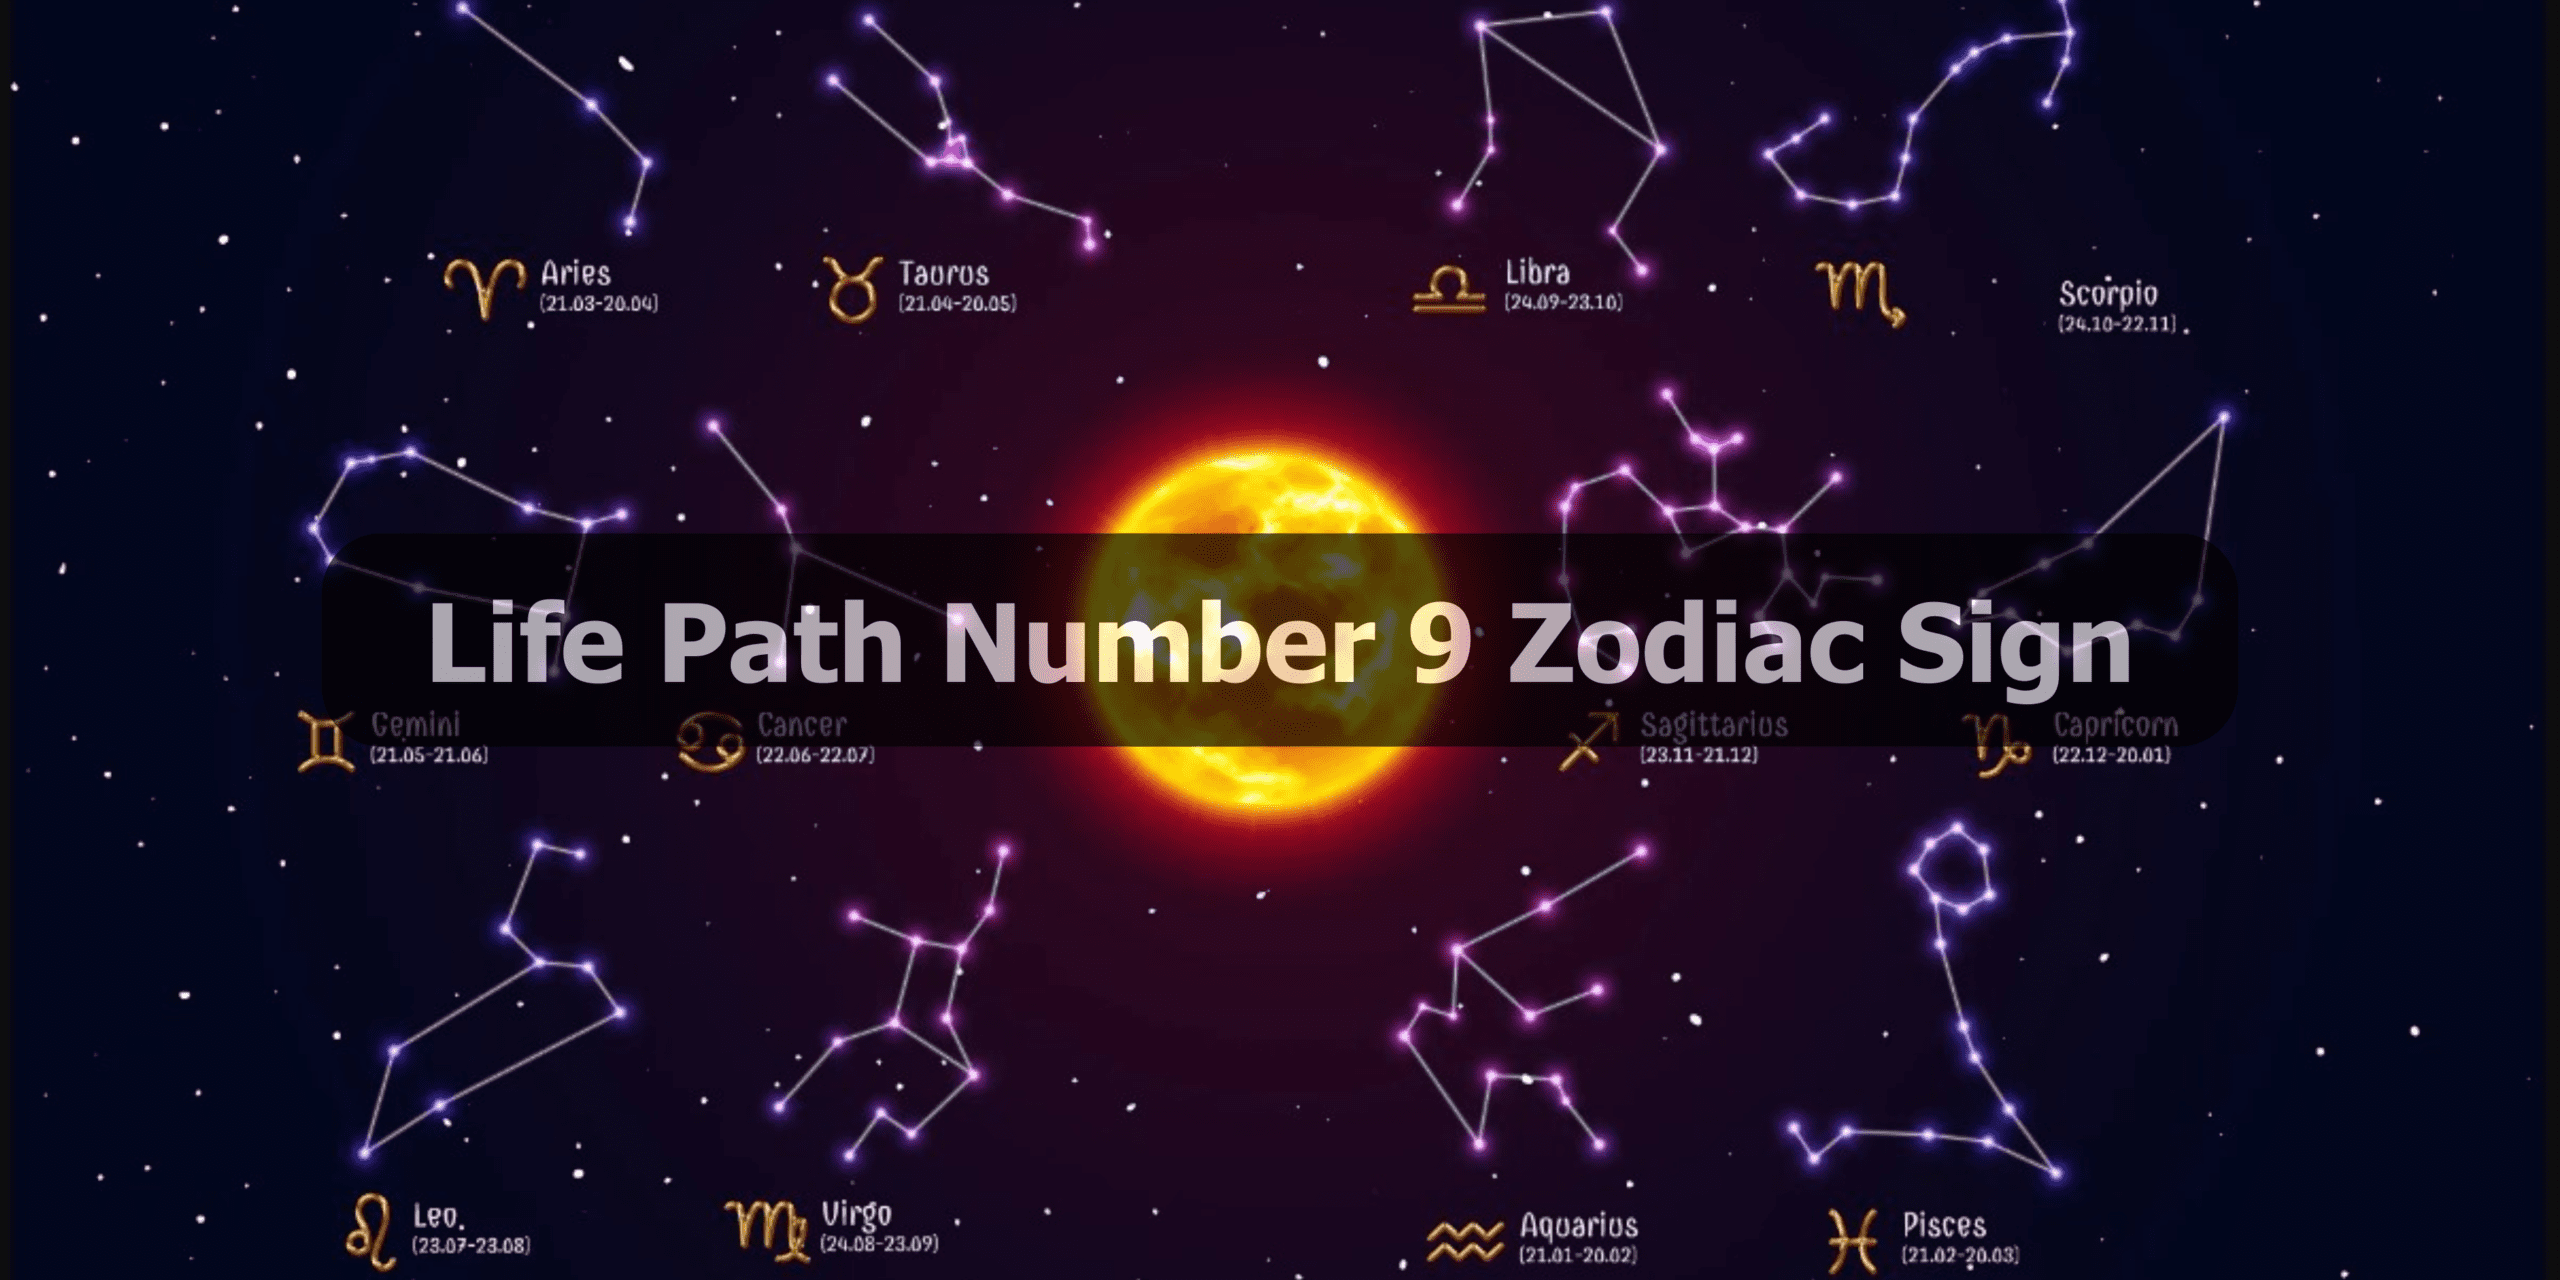 Life Path Number 9 Zodiac Sign